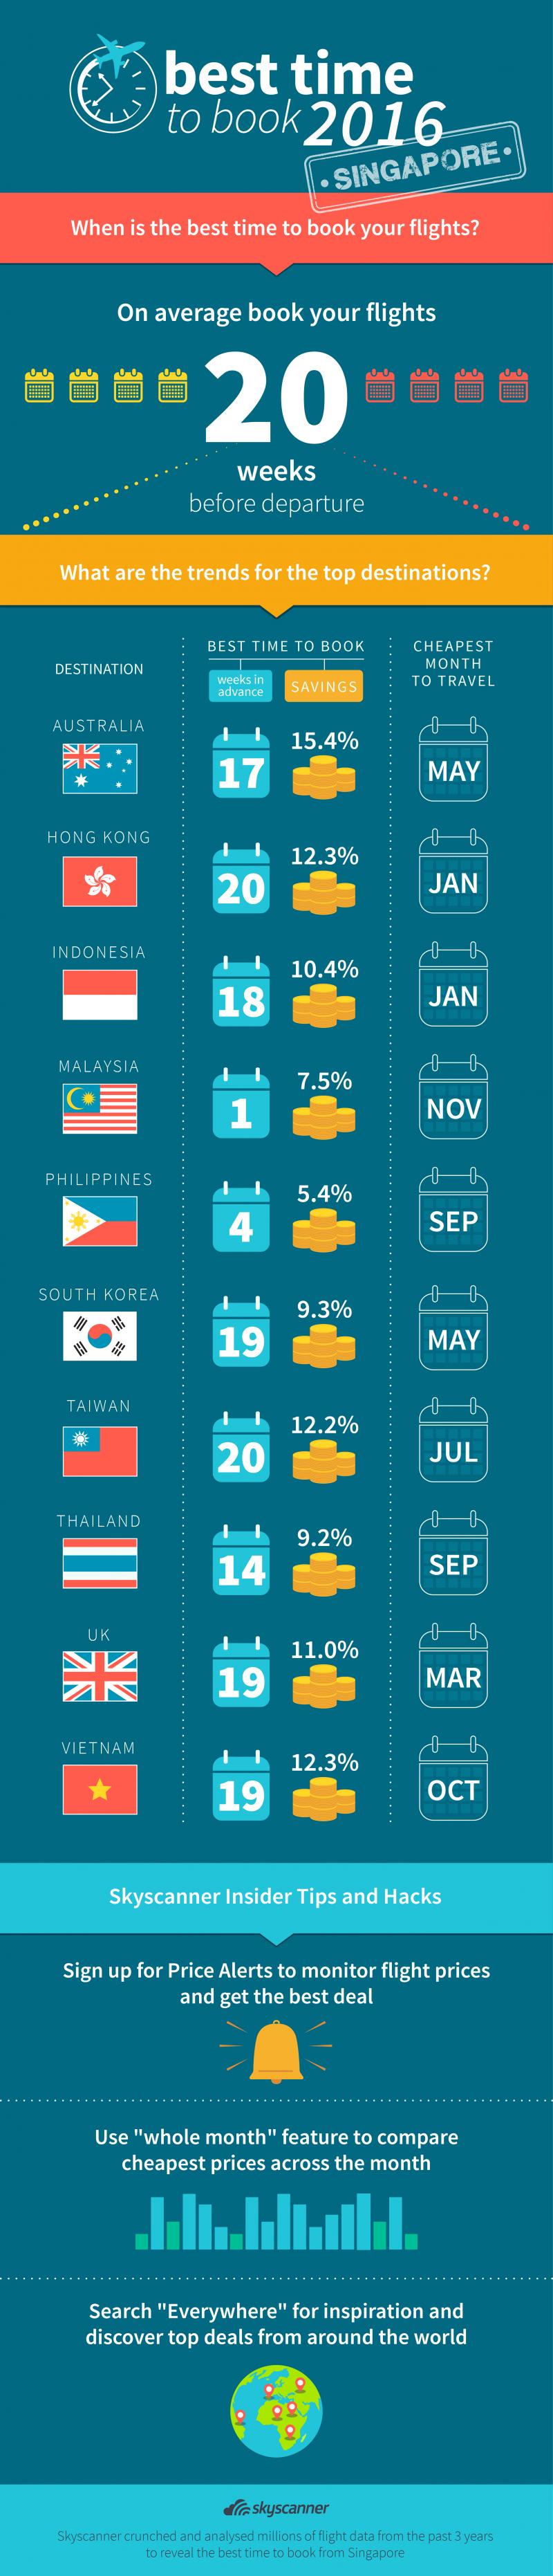 Skyscanner Best To Book infographic 